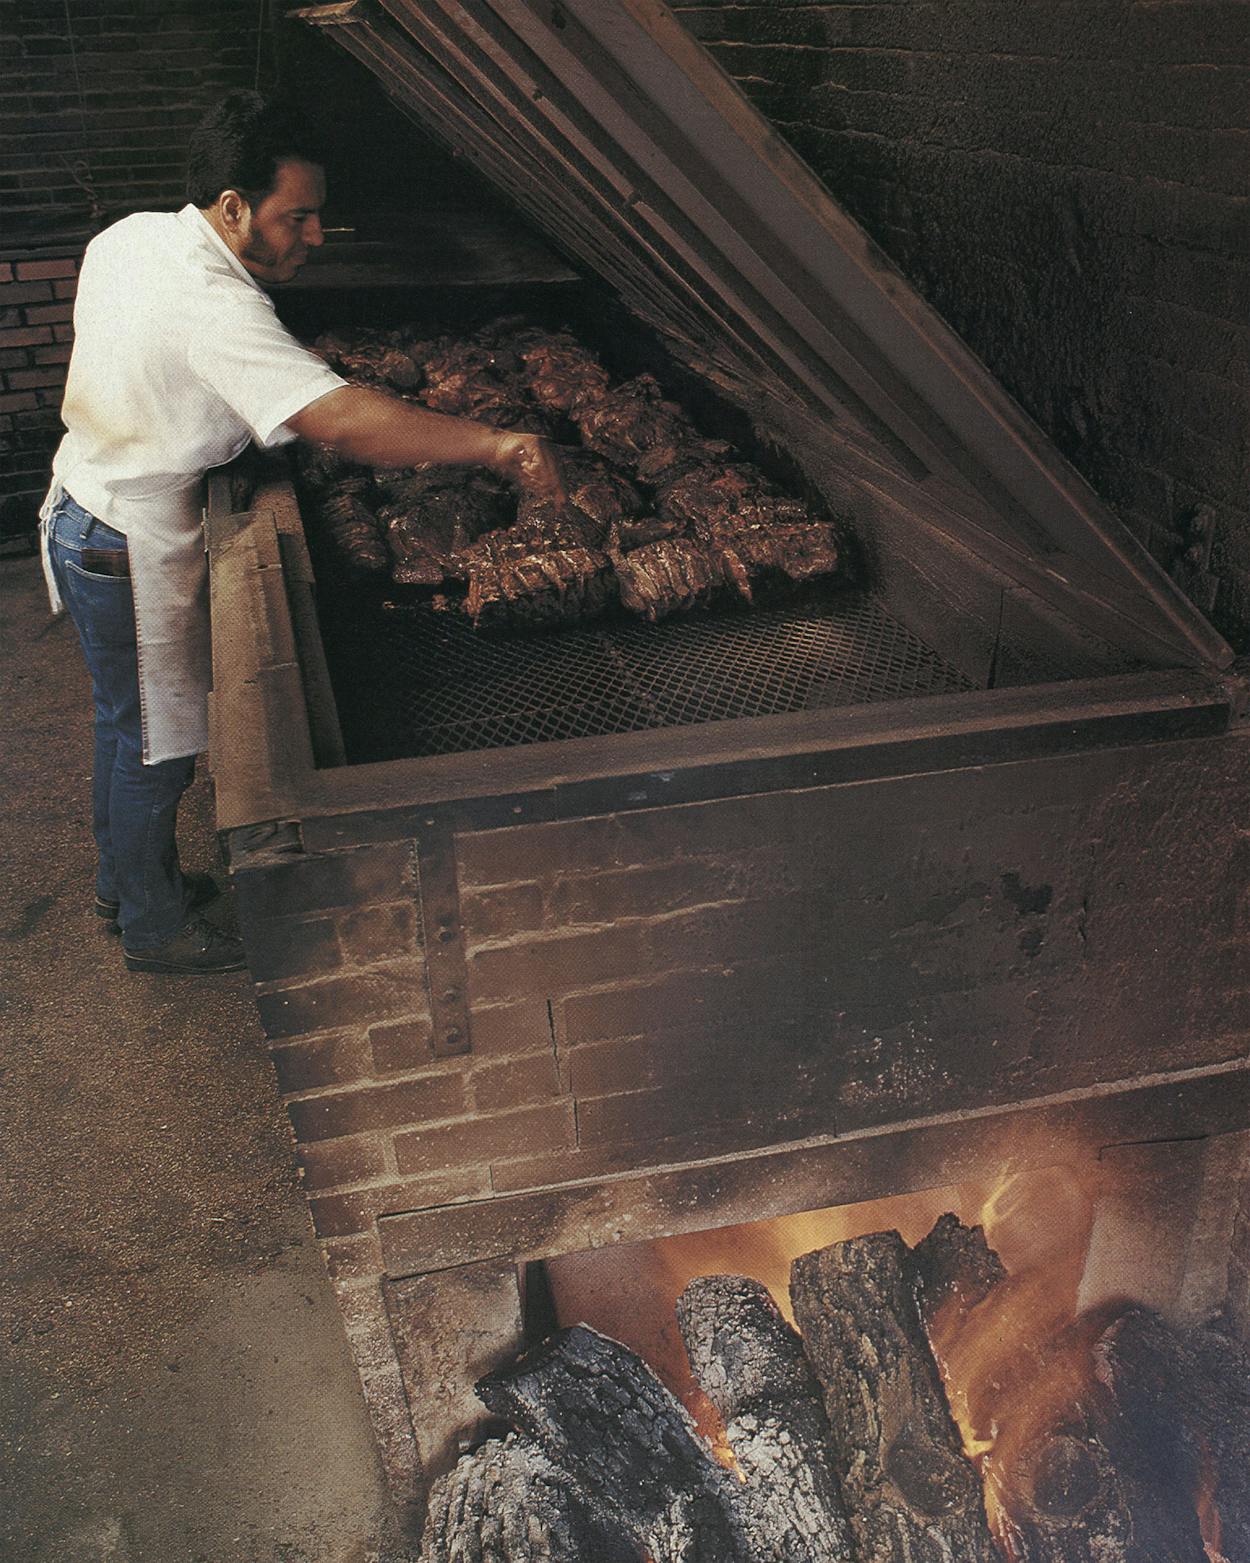 https://img.texasmonthly.com/2022/05/smokin-bbq-texas-monthly-list.jpg?auto=compress&crop=faces&fit=fit&fm=jpg&h=0&ixlib=php-3.3.1&q=45&w=1250